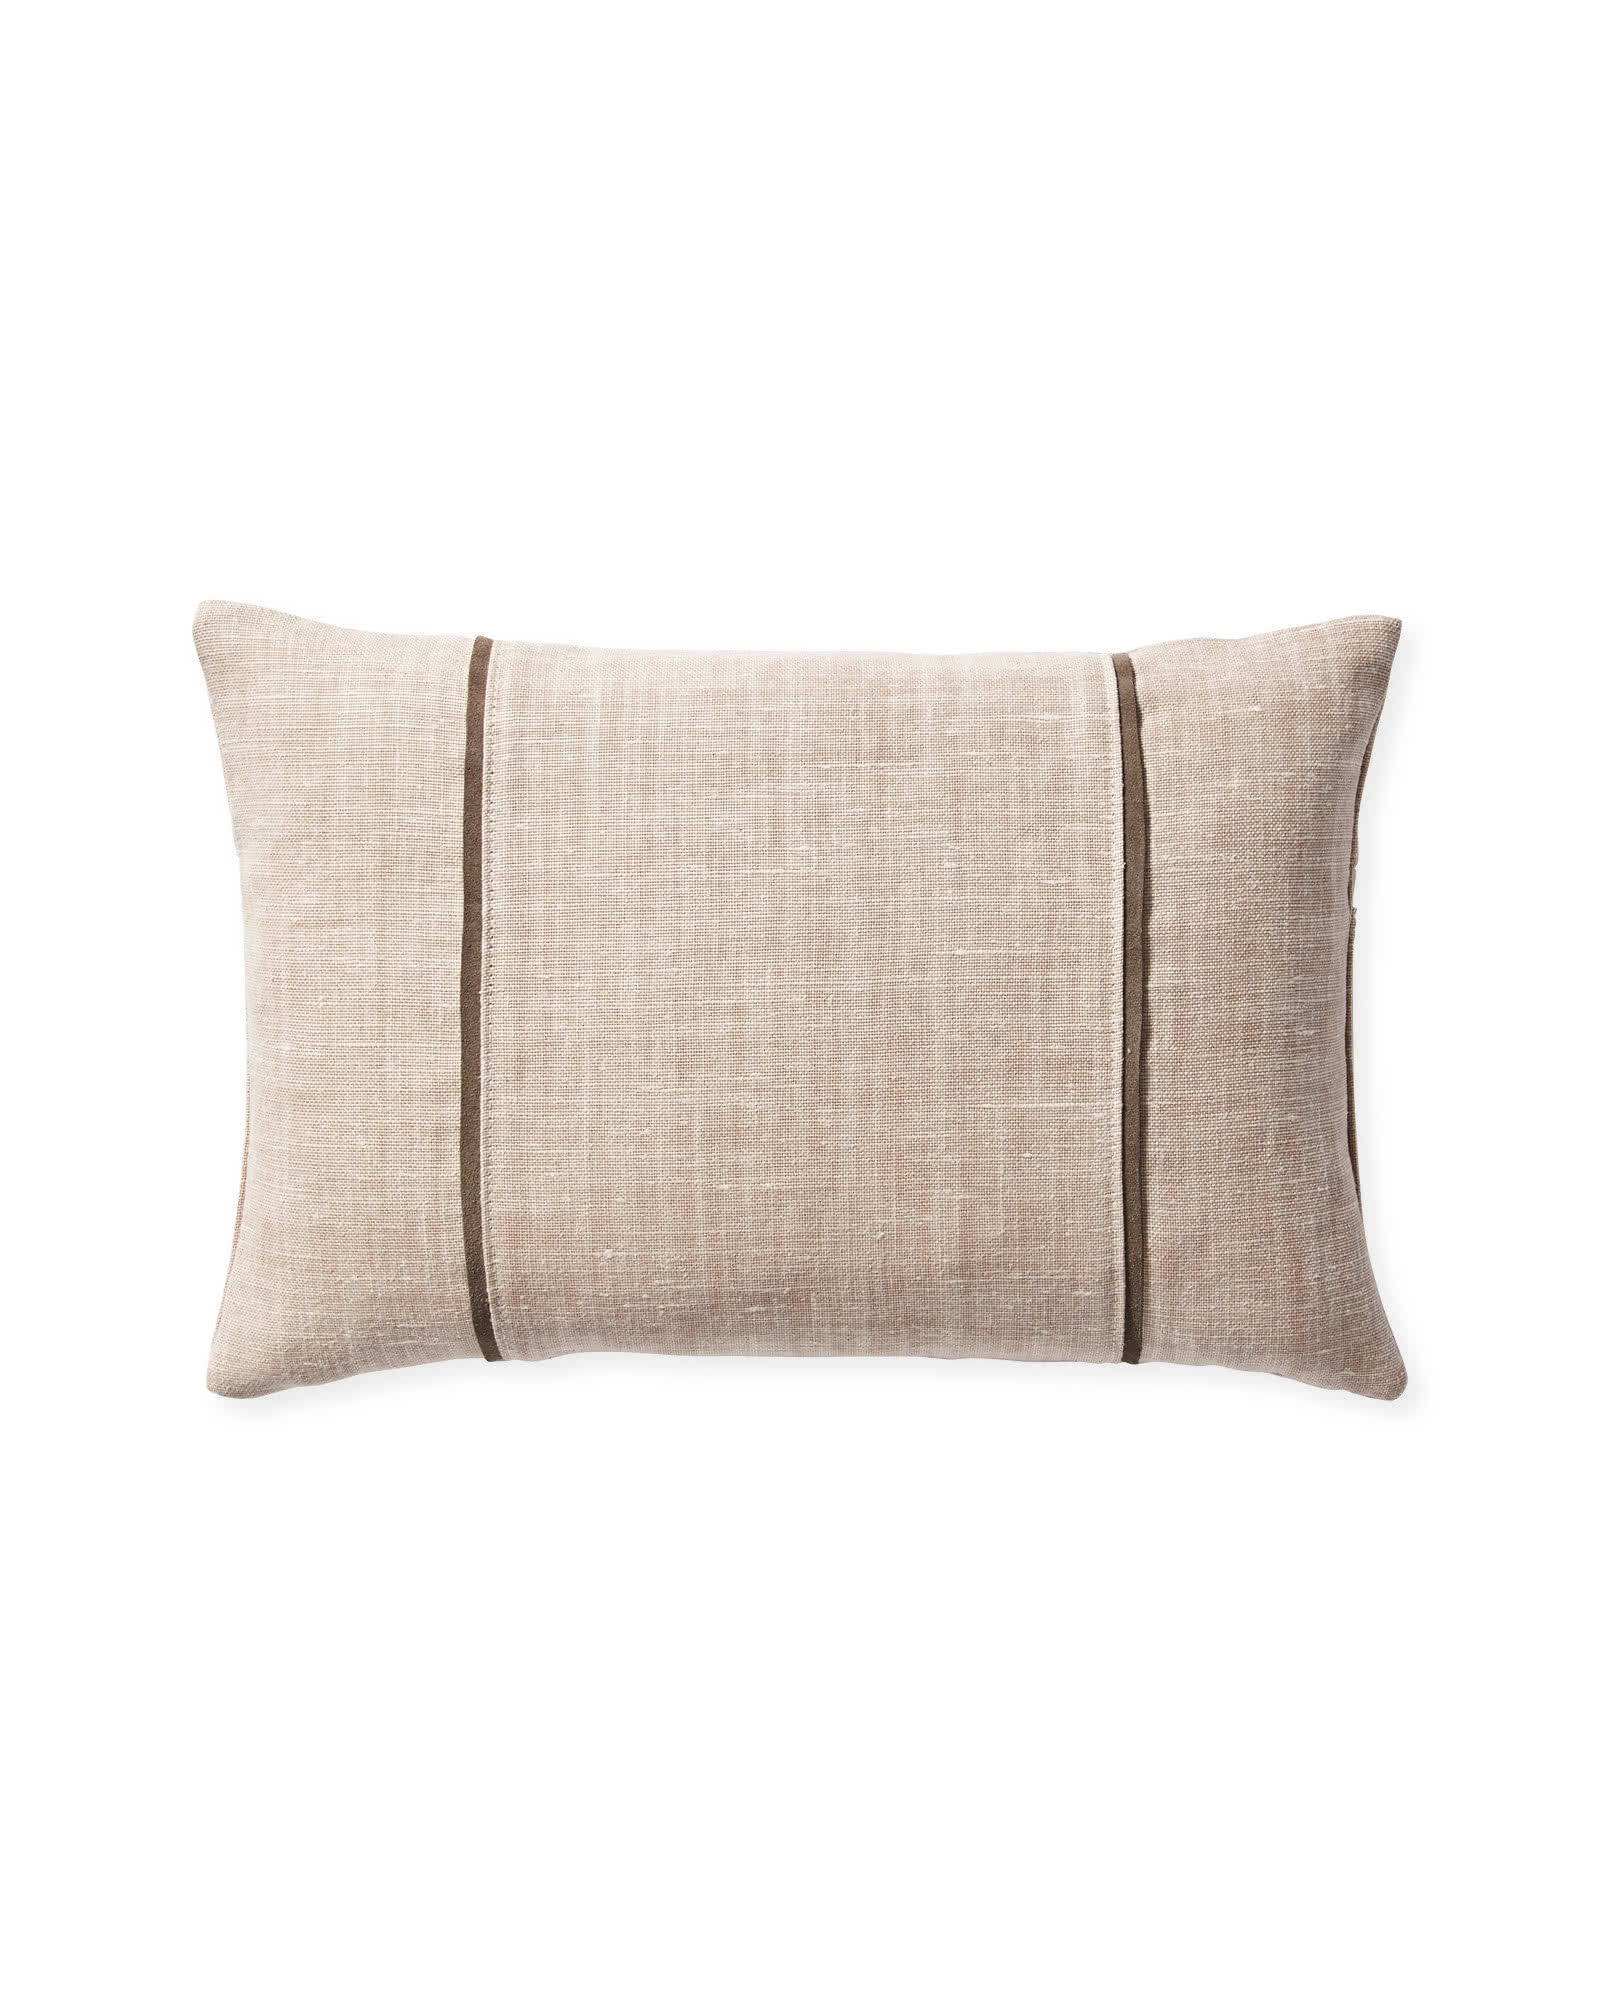 Kentfield Pillow Cover - Image 0